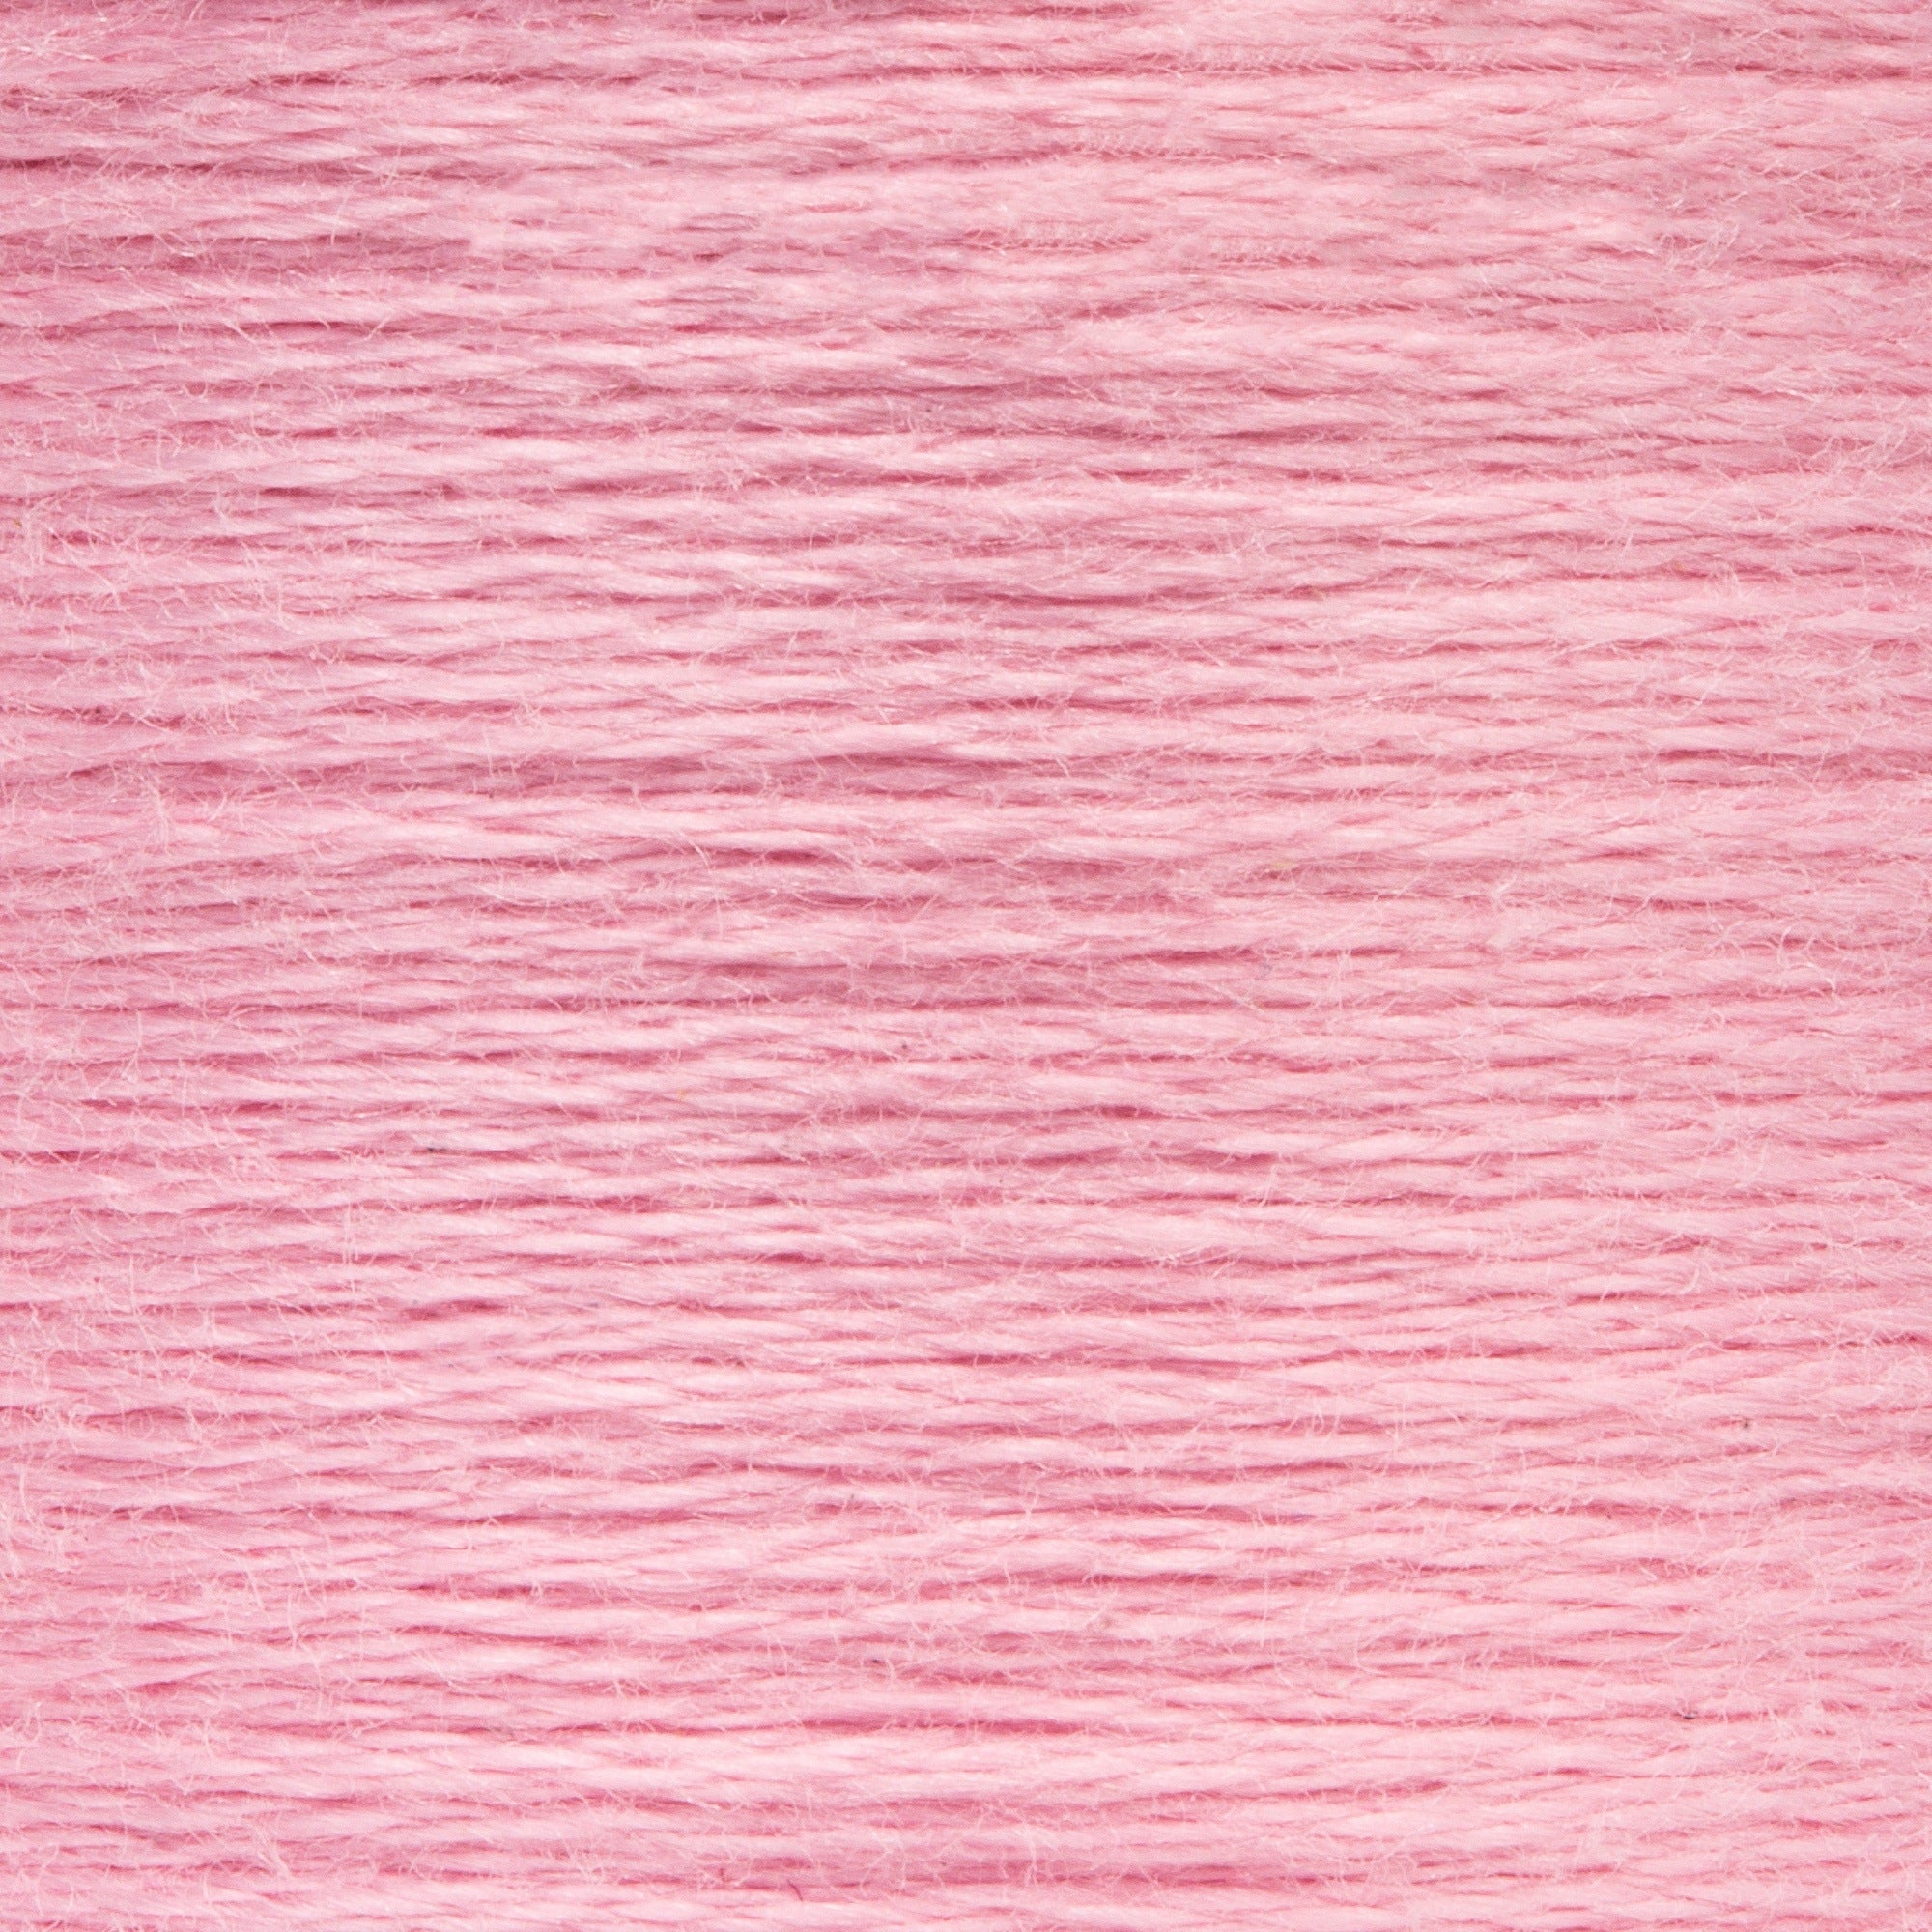 Anchor Embroidery Floss in Antique Rose Lt